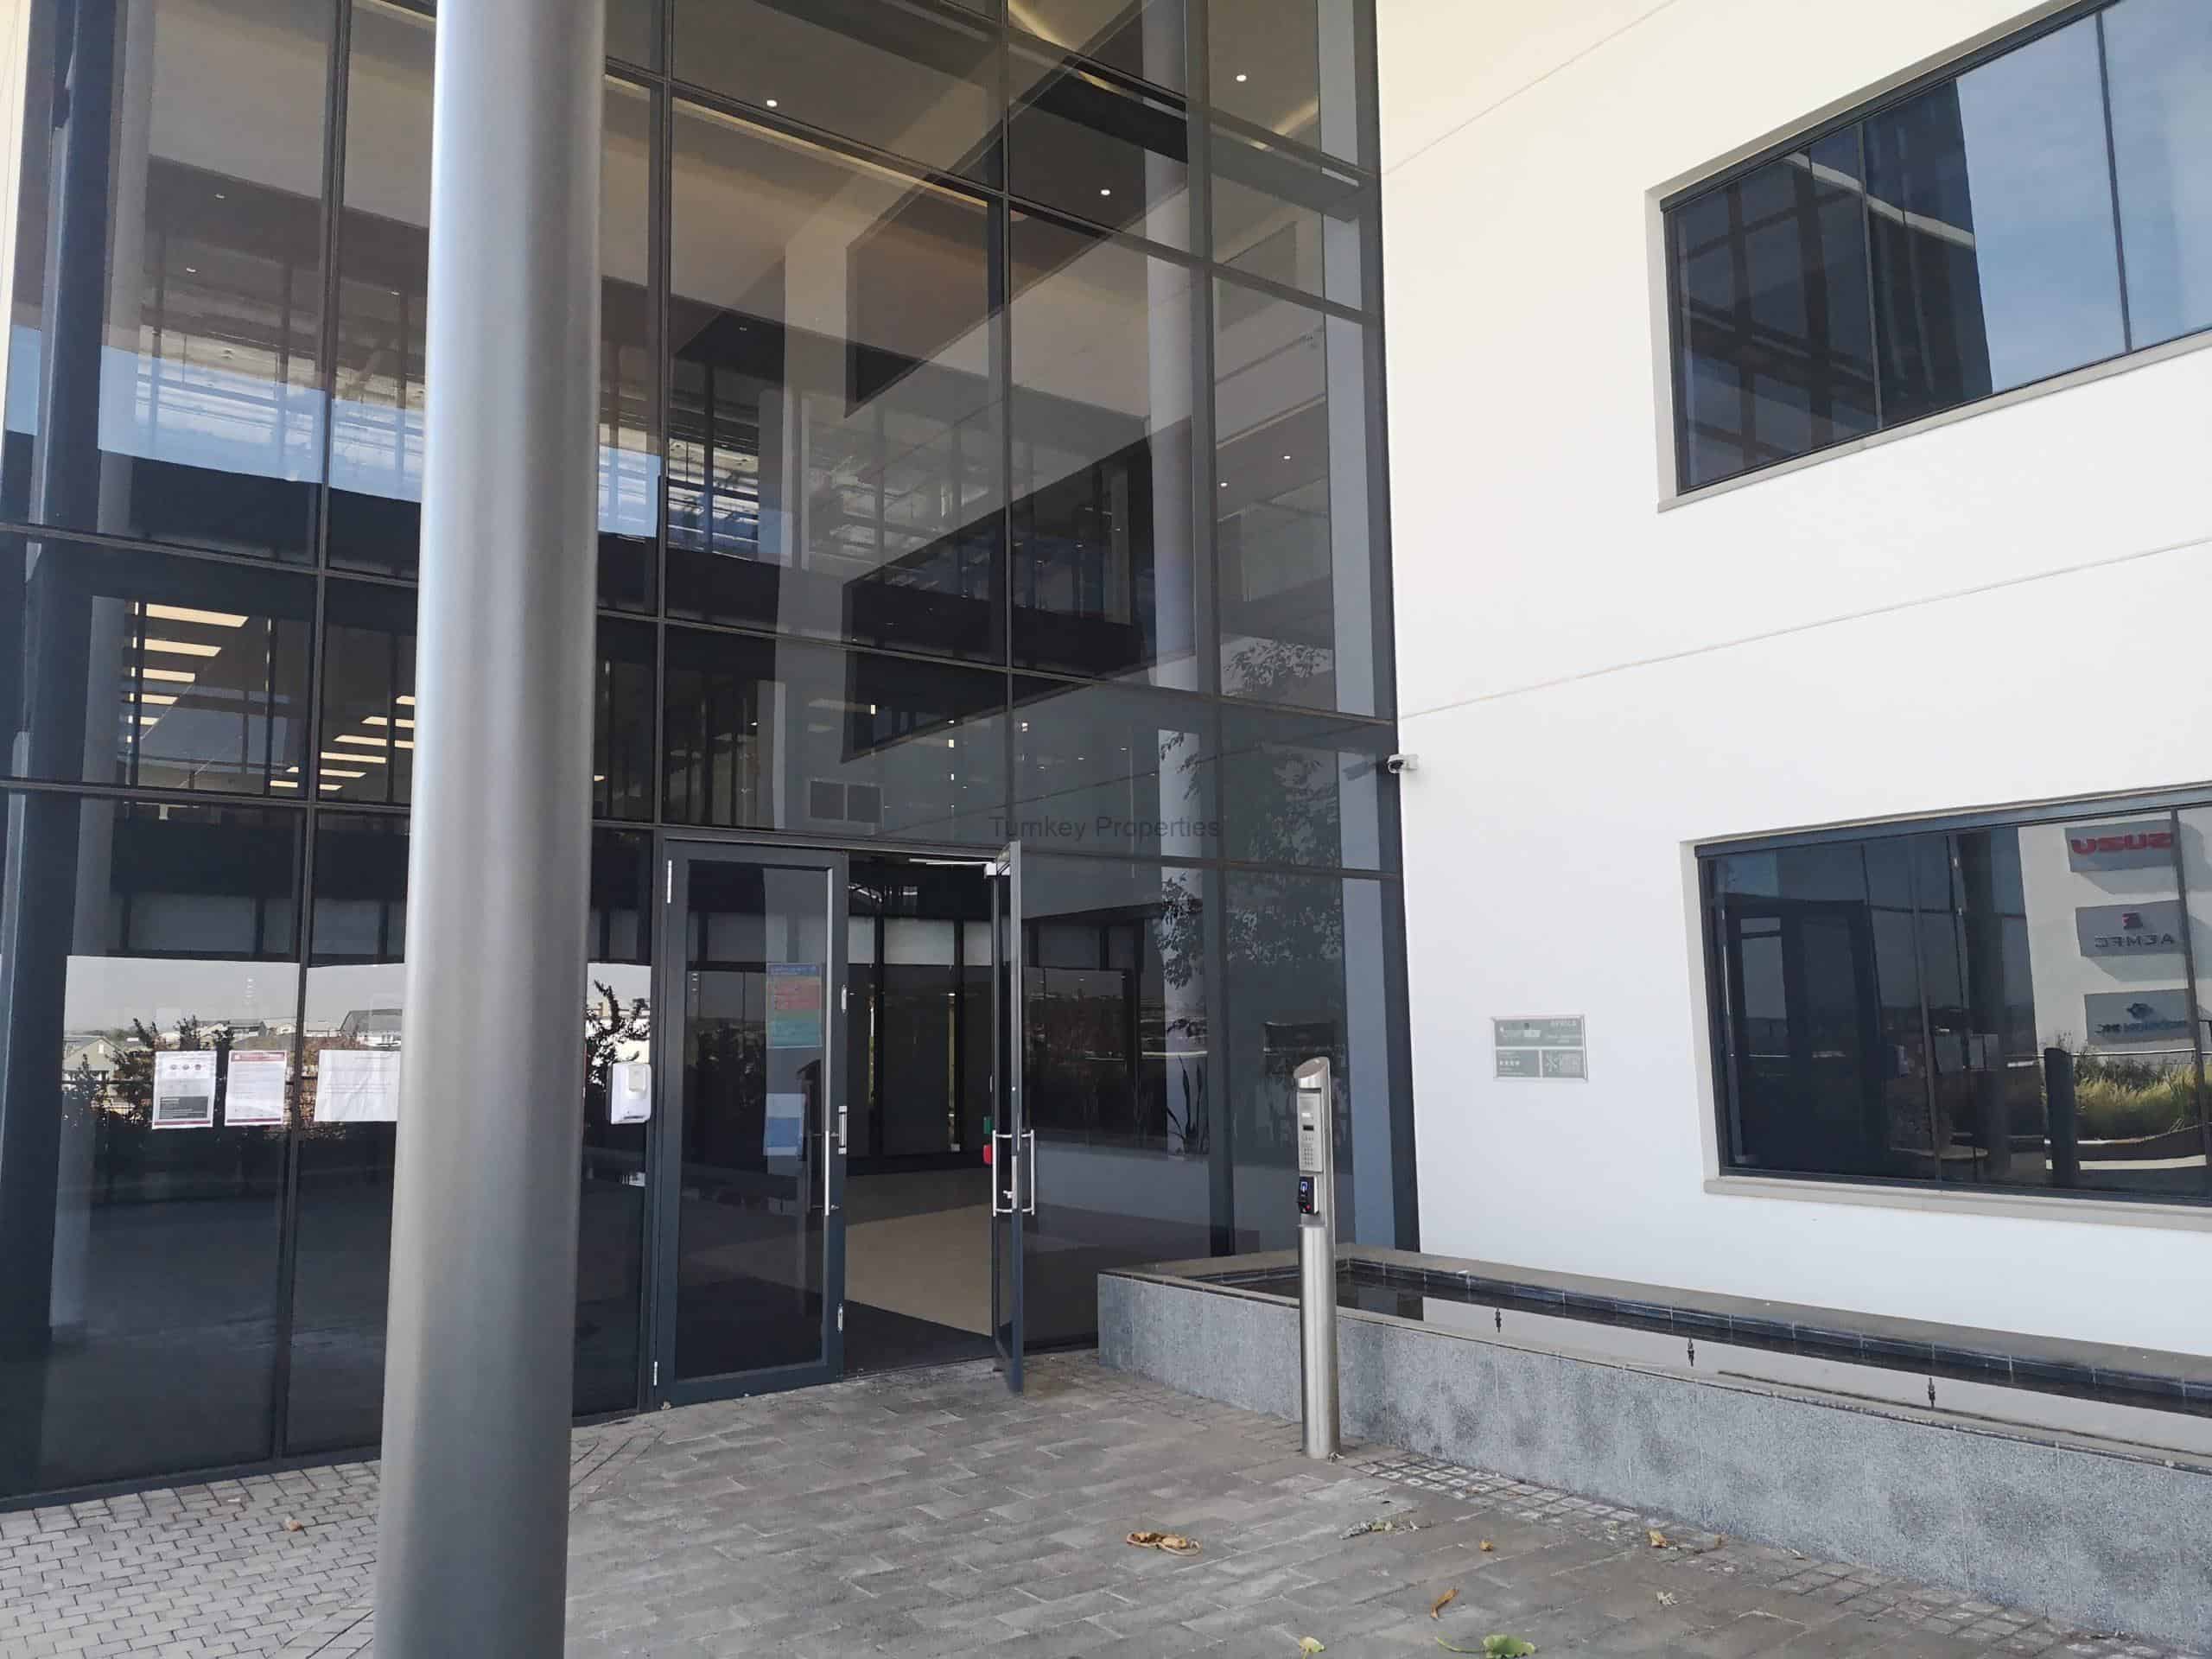 286m² office to let midrand Corporate Campus (Reduced rental)